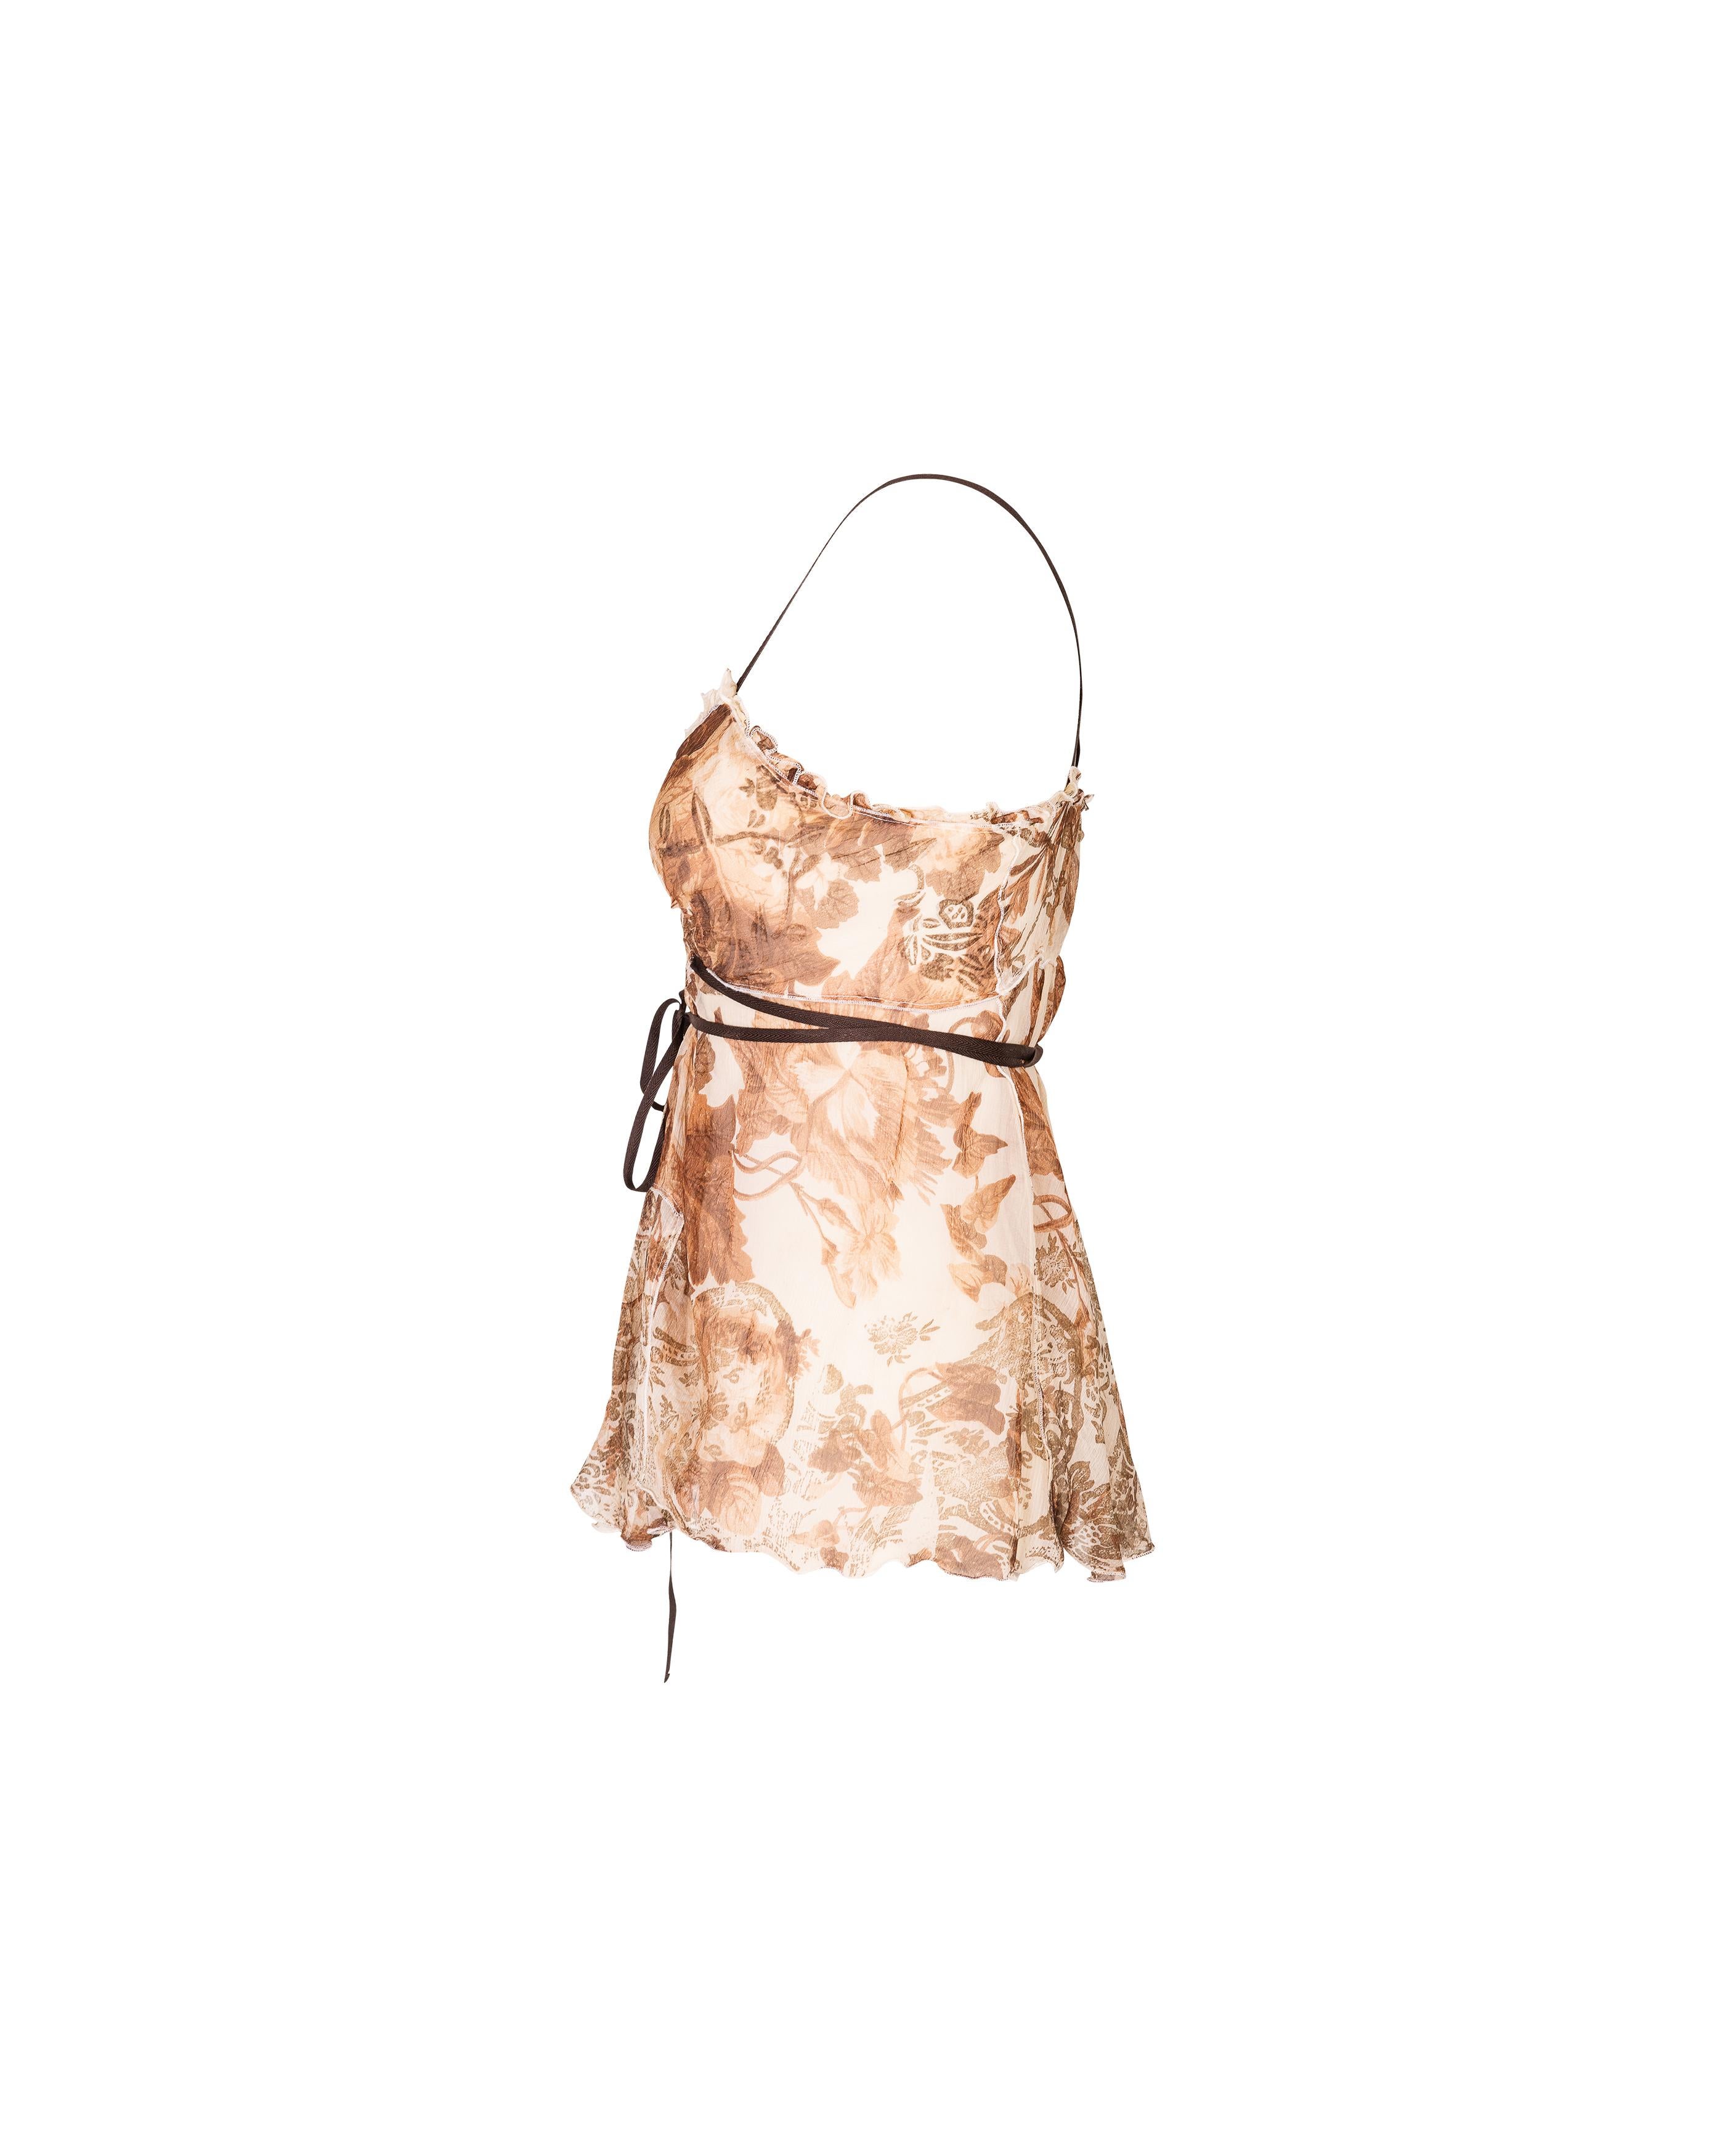 2000's Miu Miu by Miuccia Prada printed brown and cream tank top. Signature 2000's style floral print throughout. Features ruffle details, cross-back straps and sash-tie closure around waist.